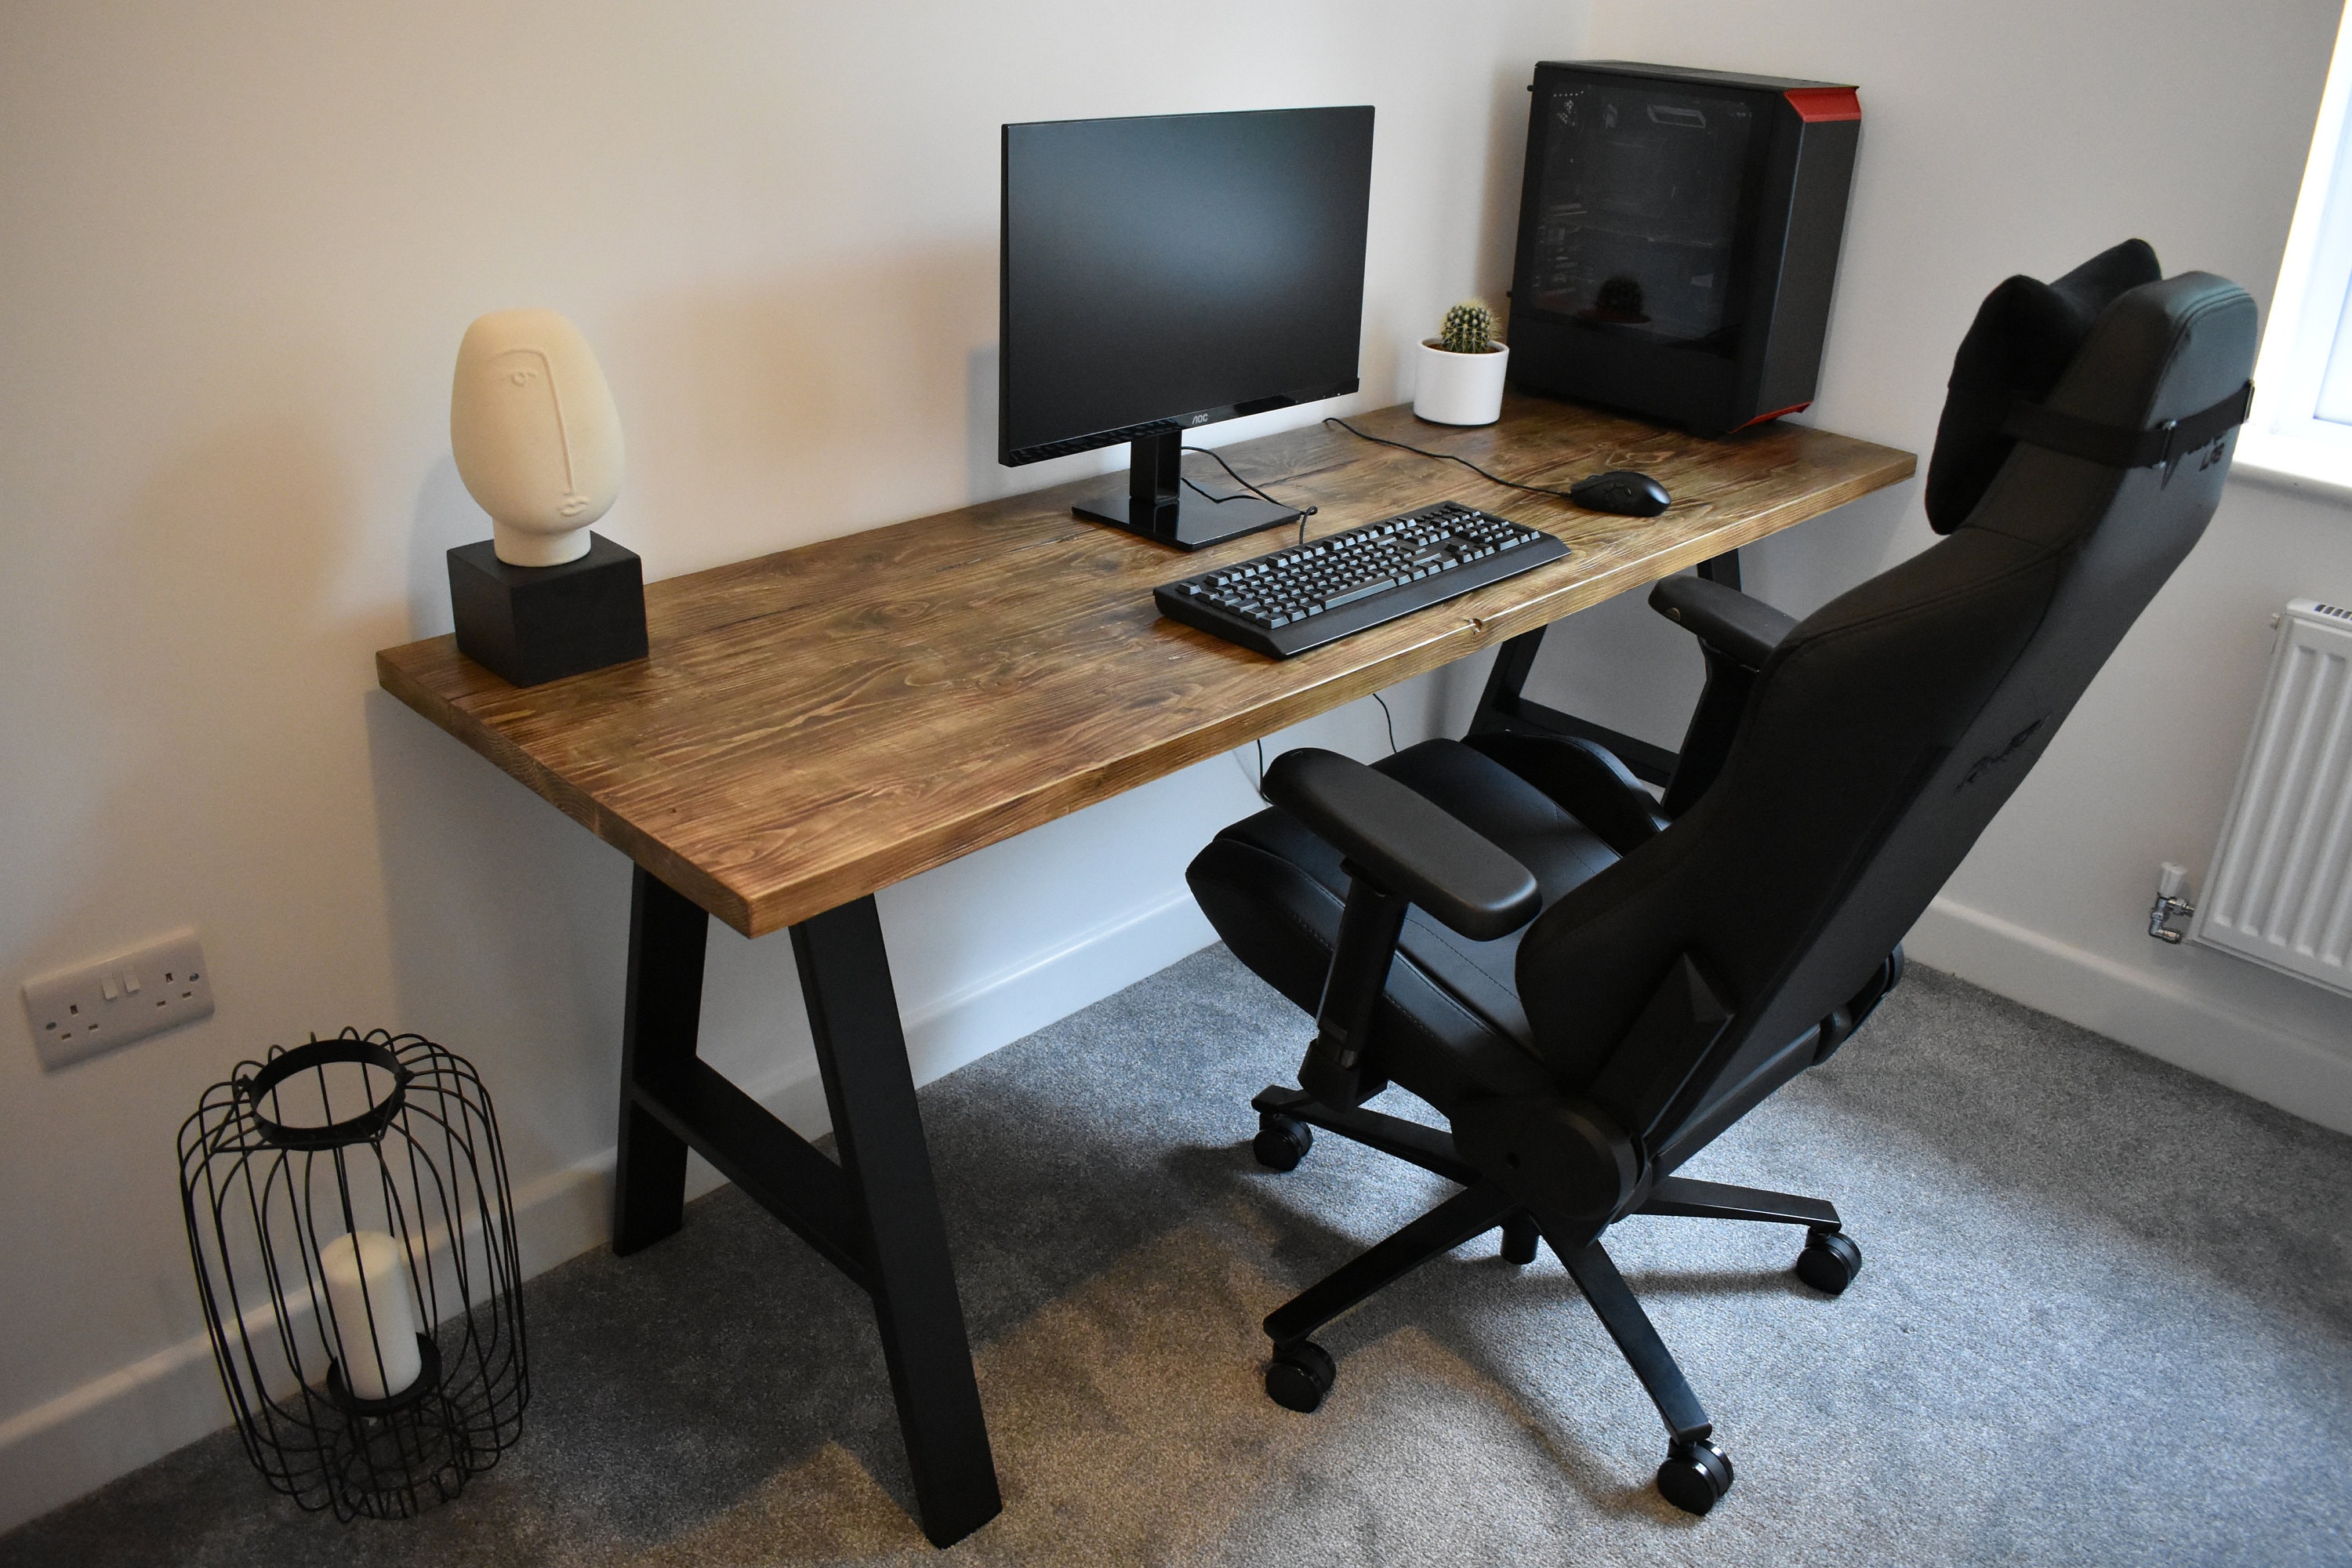 The GG Gaming Desk Rustic Meets Industrial, Solid Wood, Heavy Duty